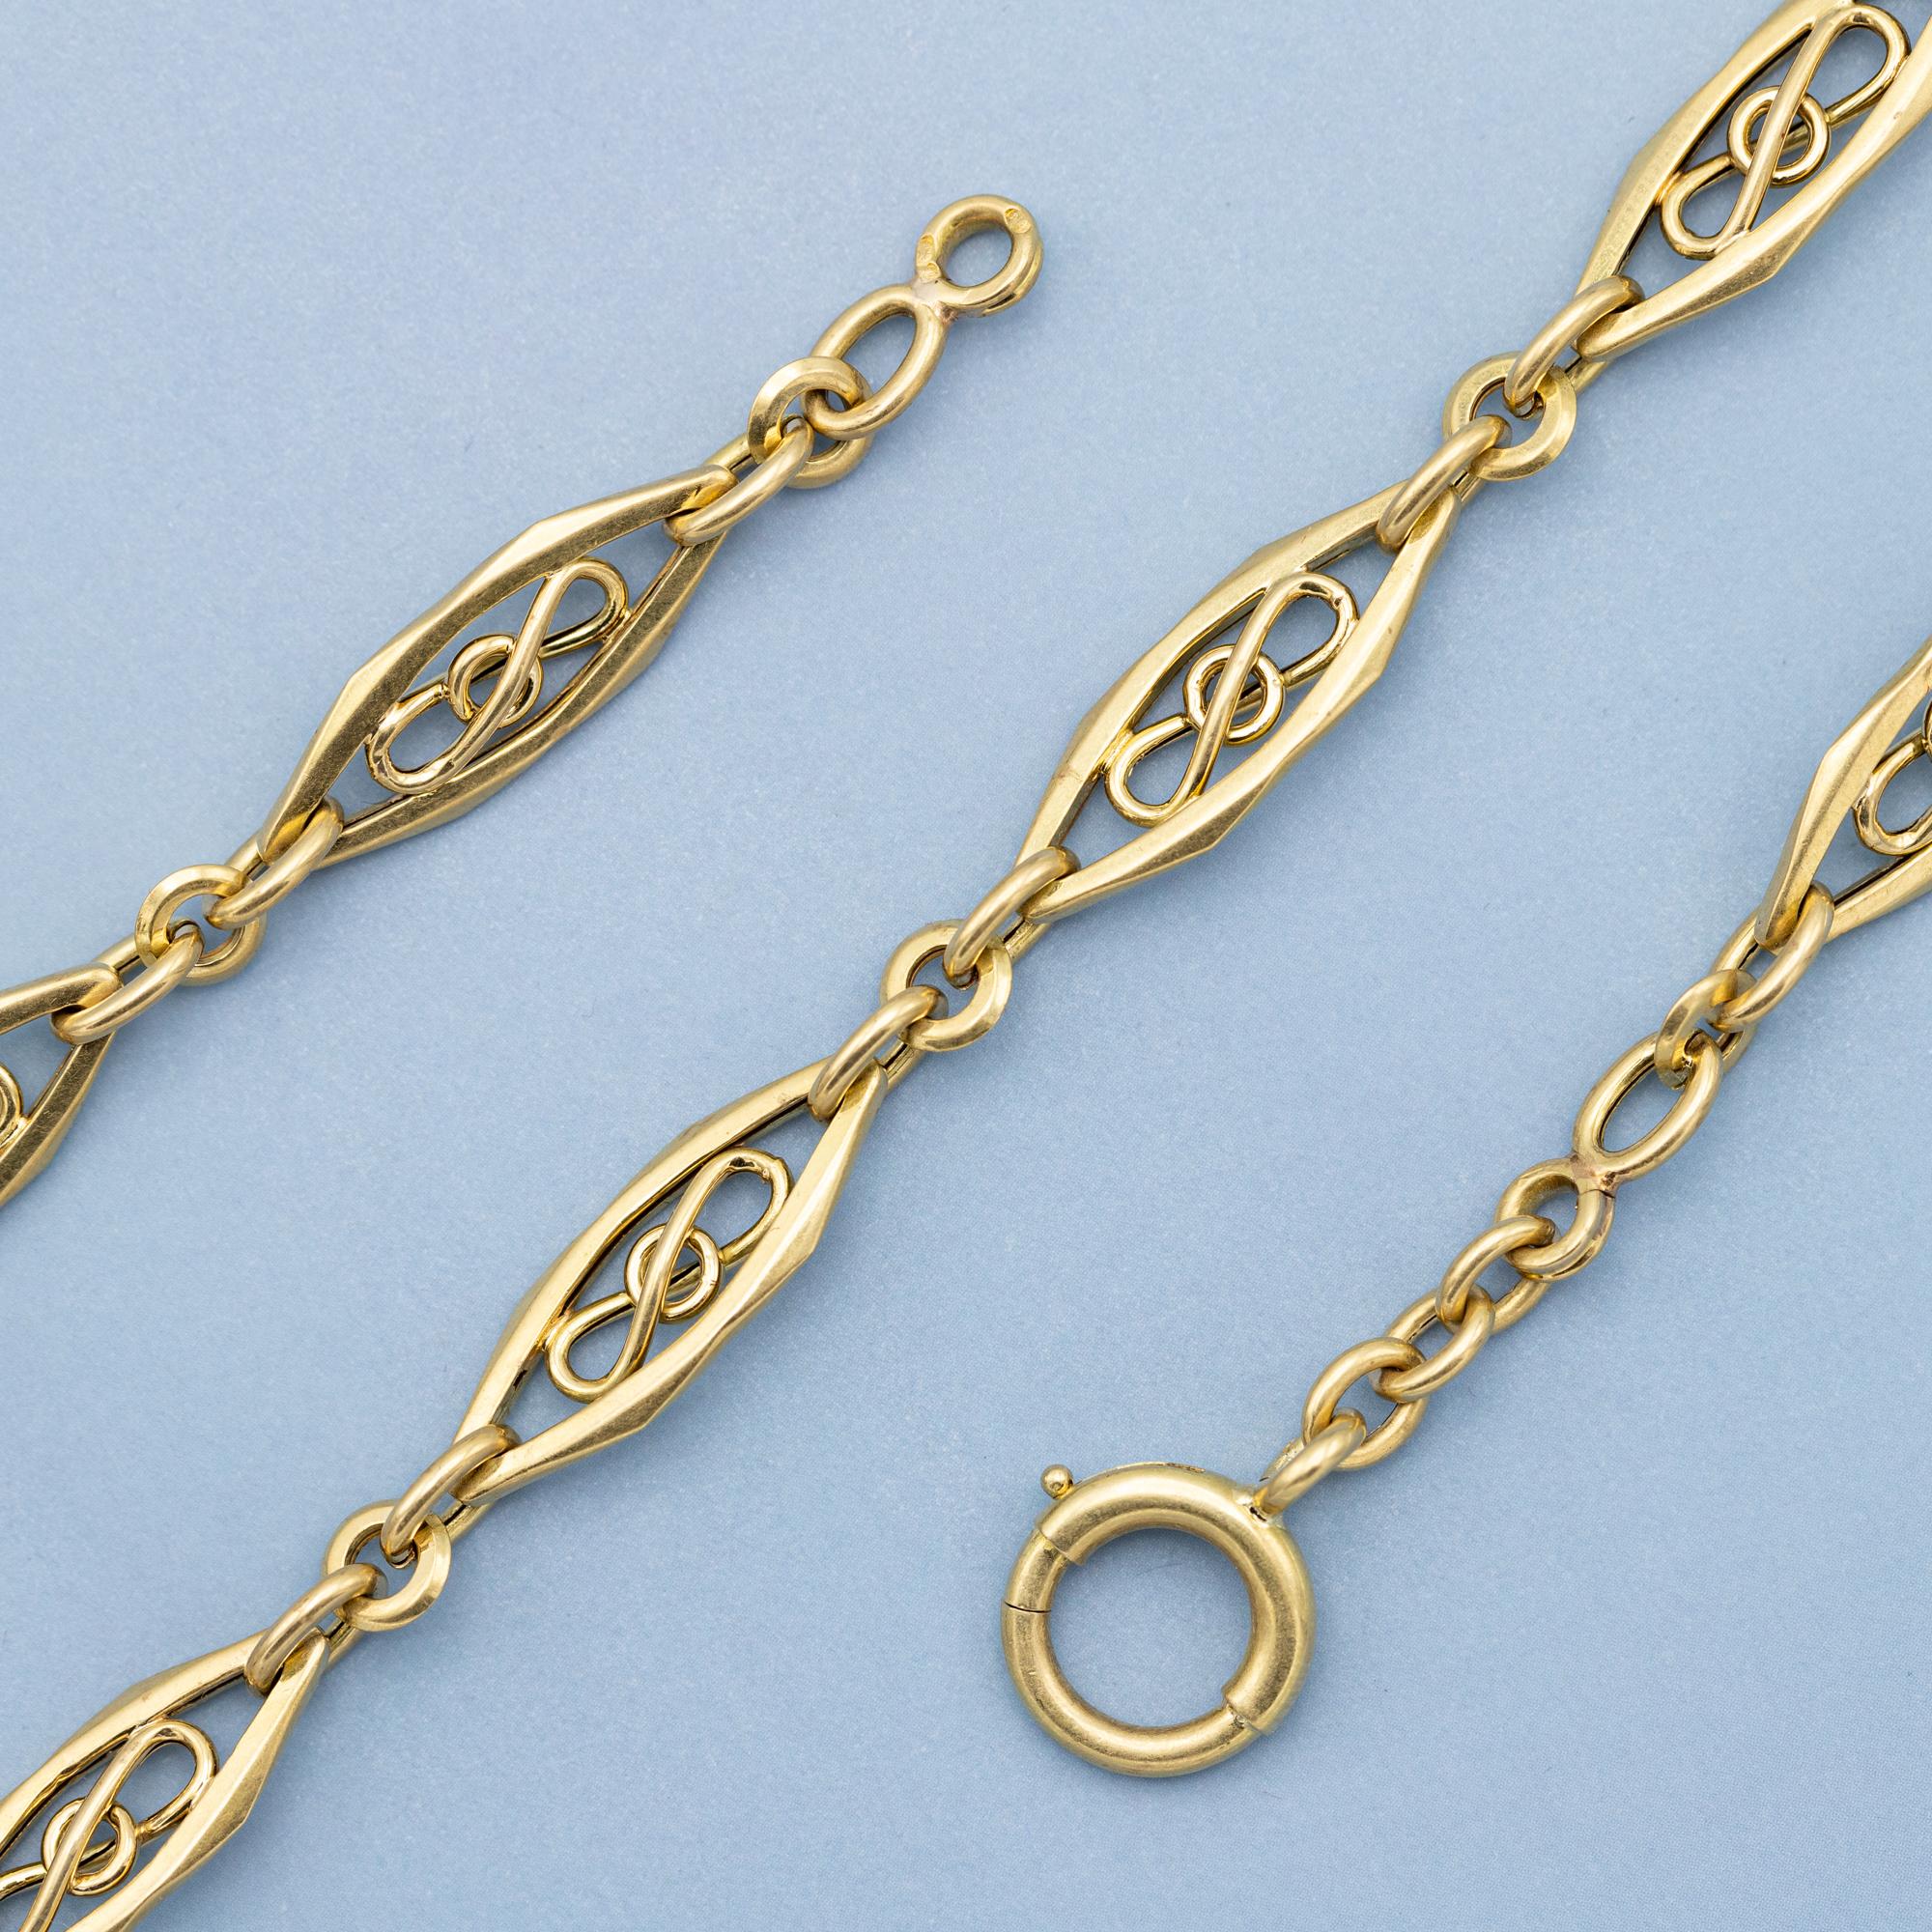 18K solid gold Pocket watch chain - Antique Necklace - Choker Sautoir 15.35 Inch In Good Condition For Sale In Antwerp, BE